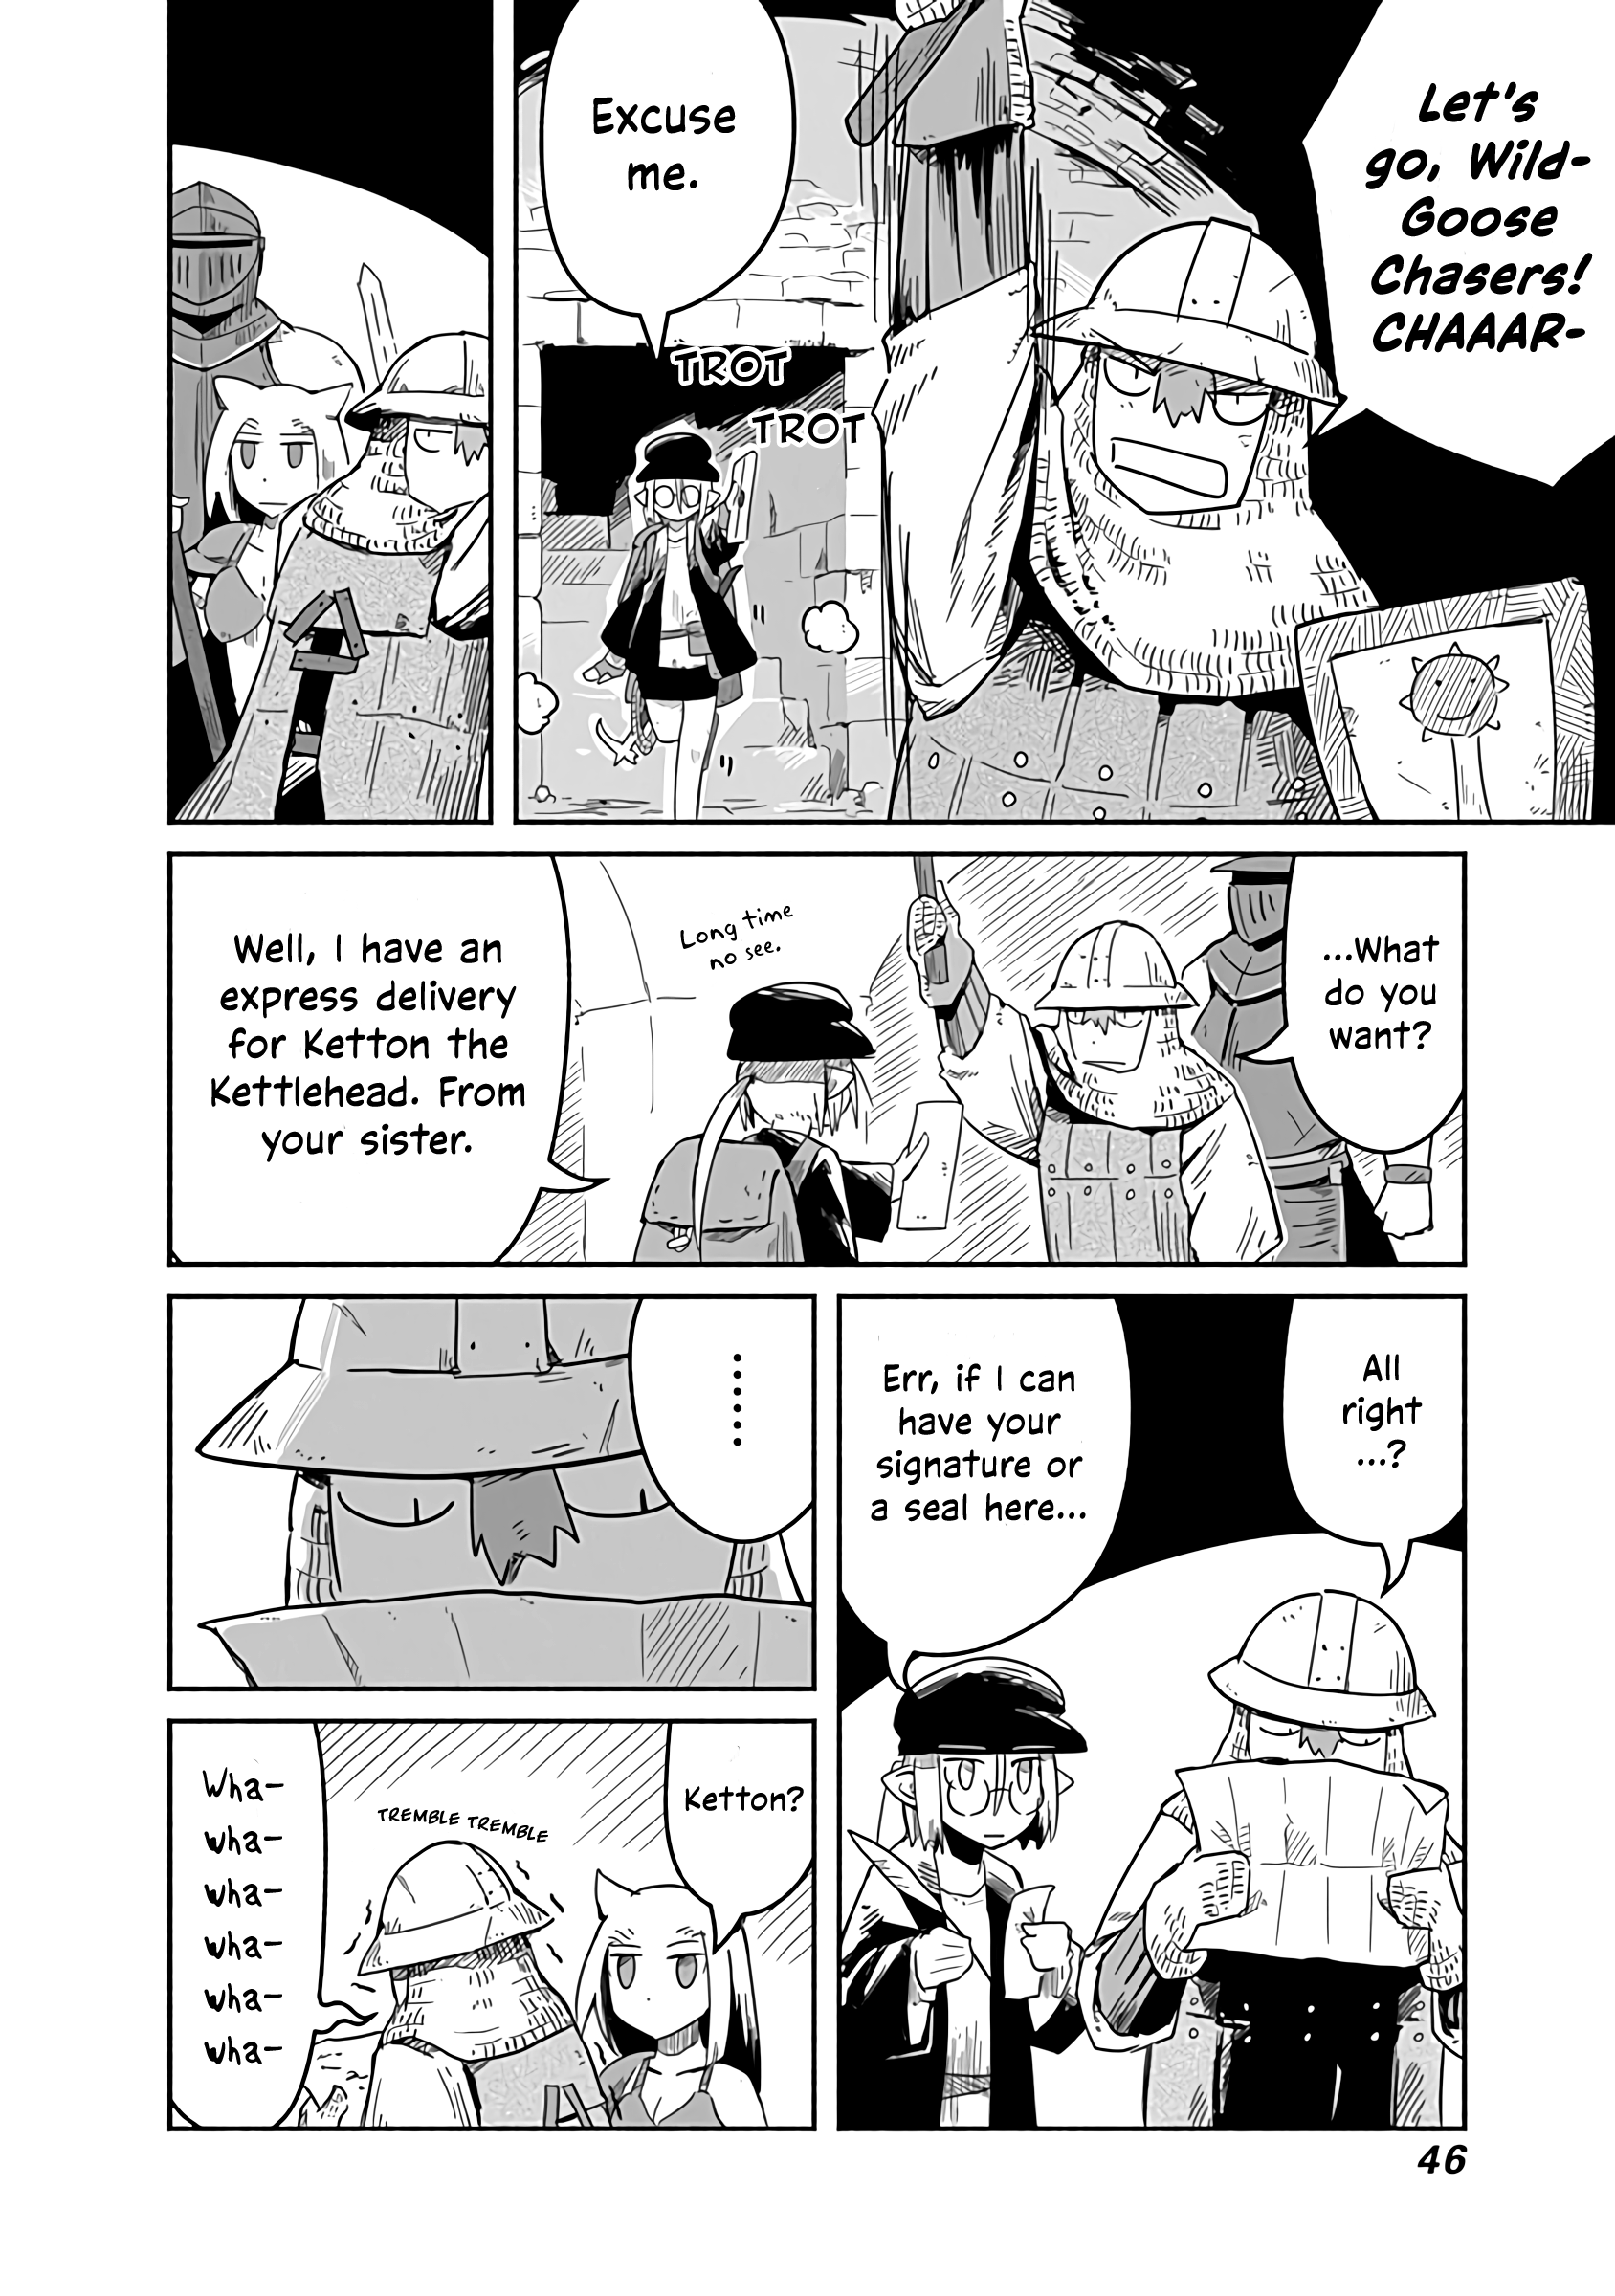 The Dragon, The Hero, And The Courier Vol.4 Chapter 22: Yoshida, The Wizards, And The Express Delivery - Picture 3